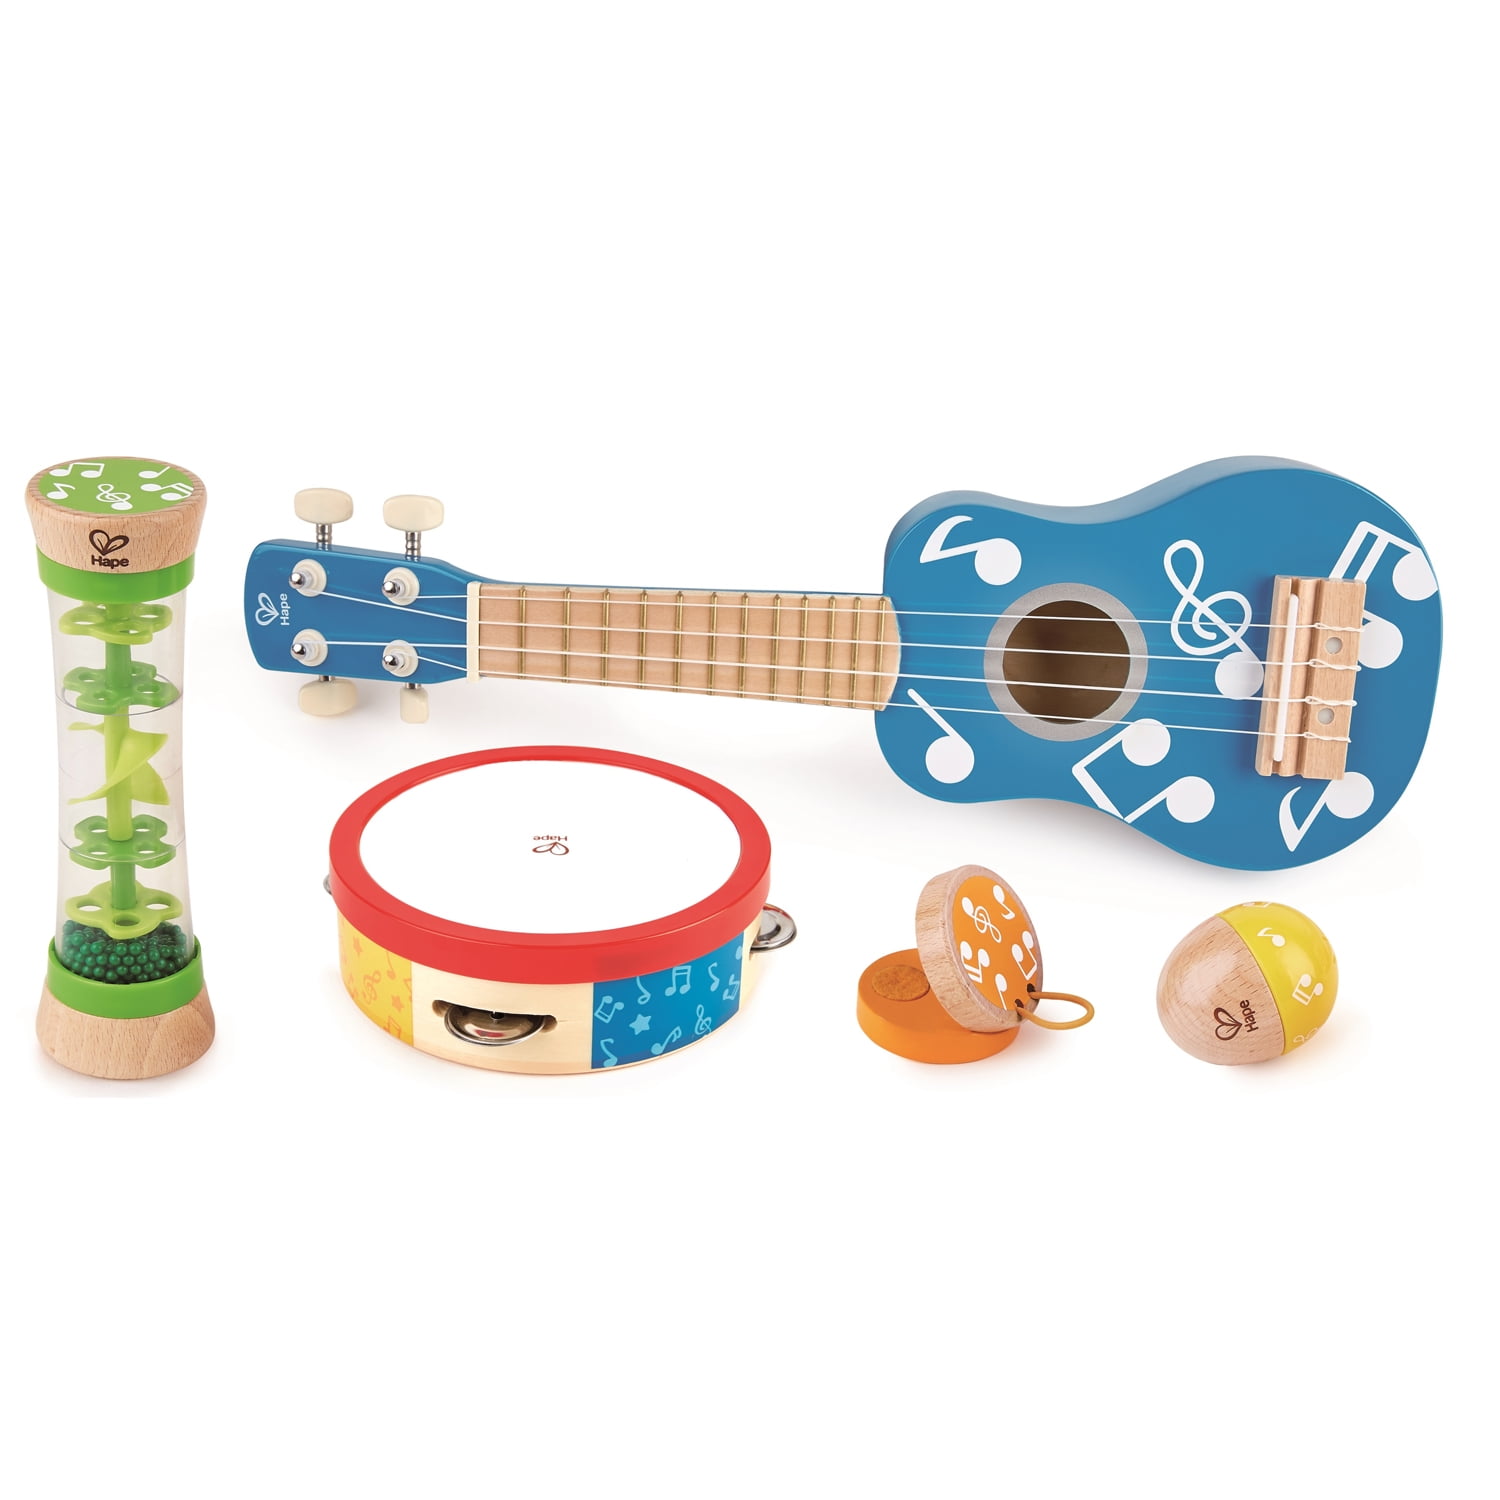 Wooden toy 5 piece instrument set brand new & sealed age 3+ 